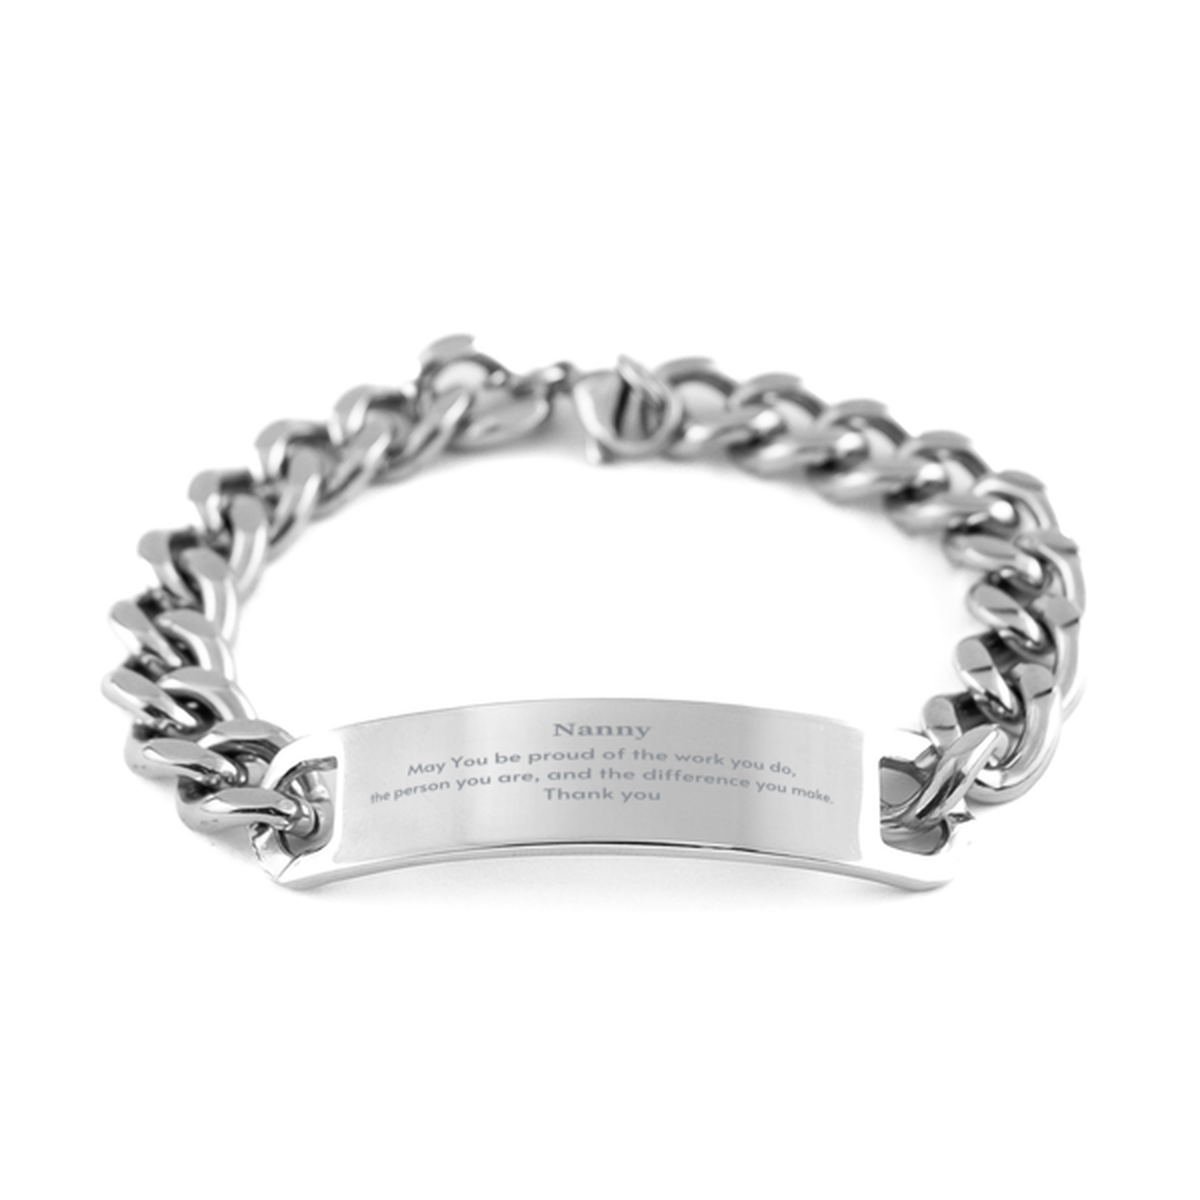 Heartwarming Cuban Chain Stainless Steel Bracelet Retirement Coworkers Gifts for Nanny, Nanny May You be proud of the work you do, the person you are Gifts for Boss Men Women Friends